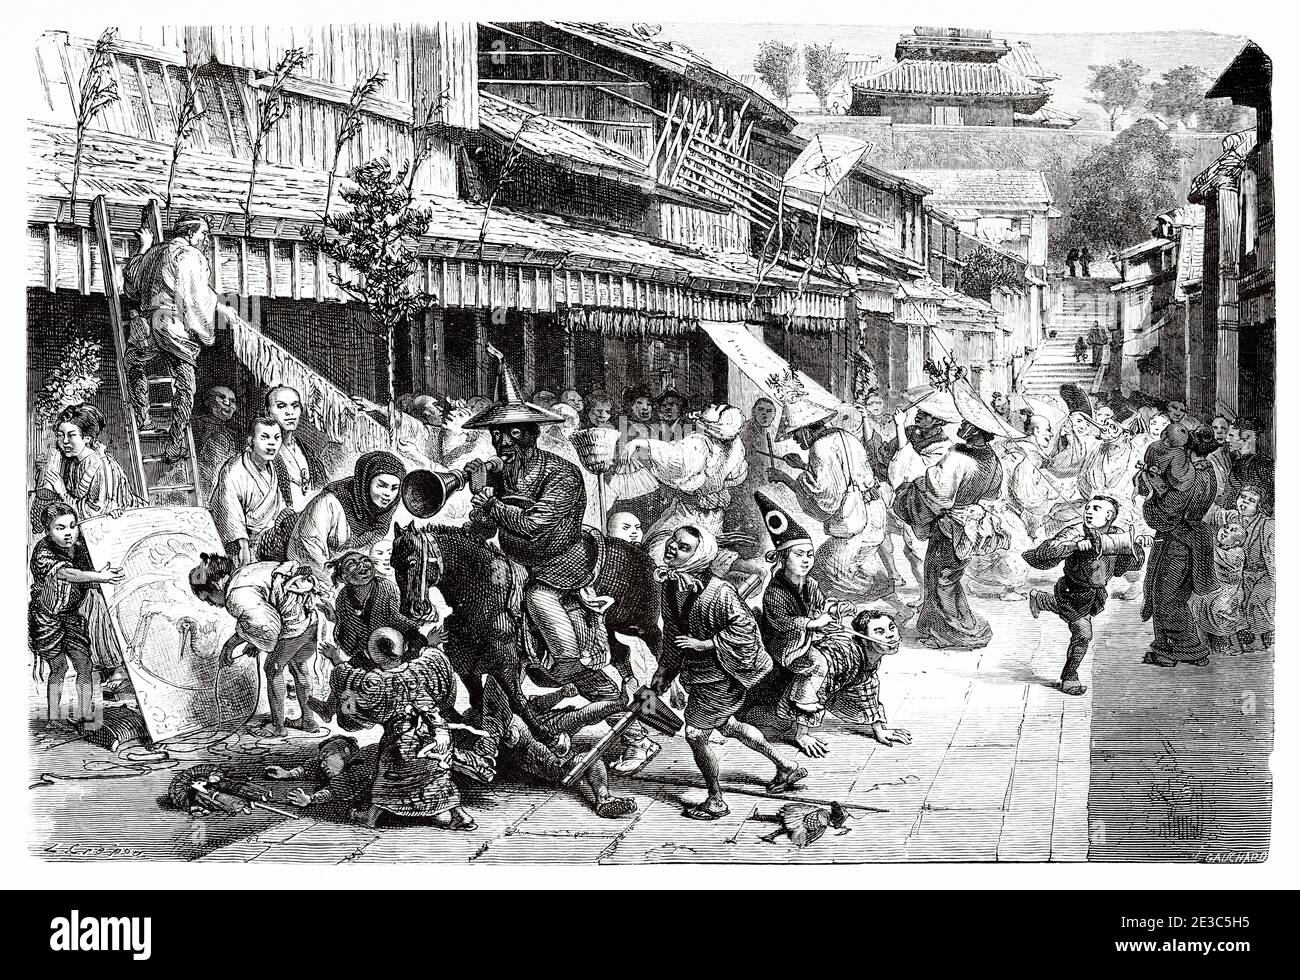 People celebrating on a Tokyo street on New Years Day, Japan. Old 19th century engraved illustration Travel to Japan by Aime Humbert  from El Mundo en La Mano 1879 Stock Photo